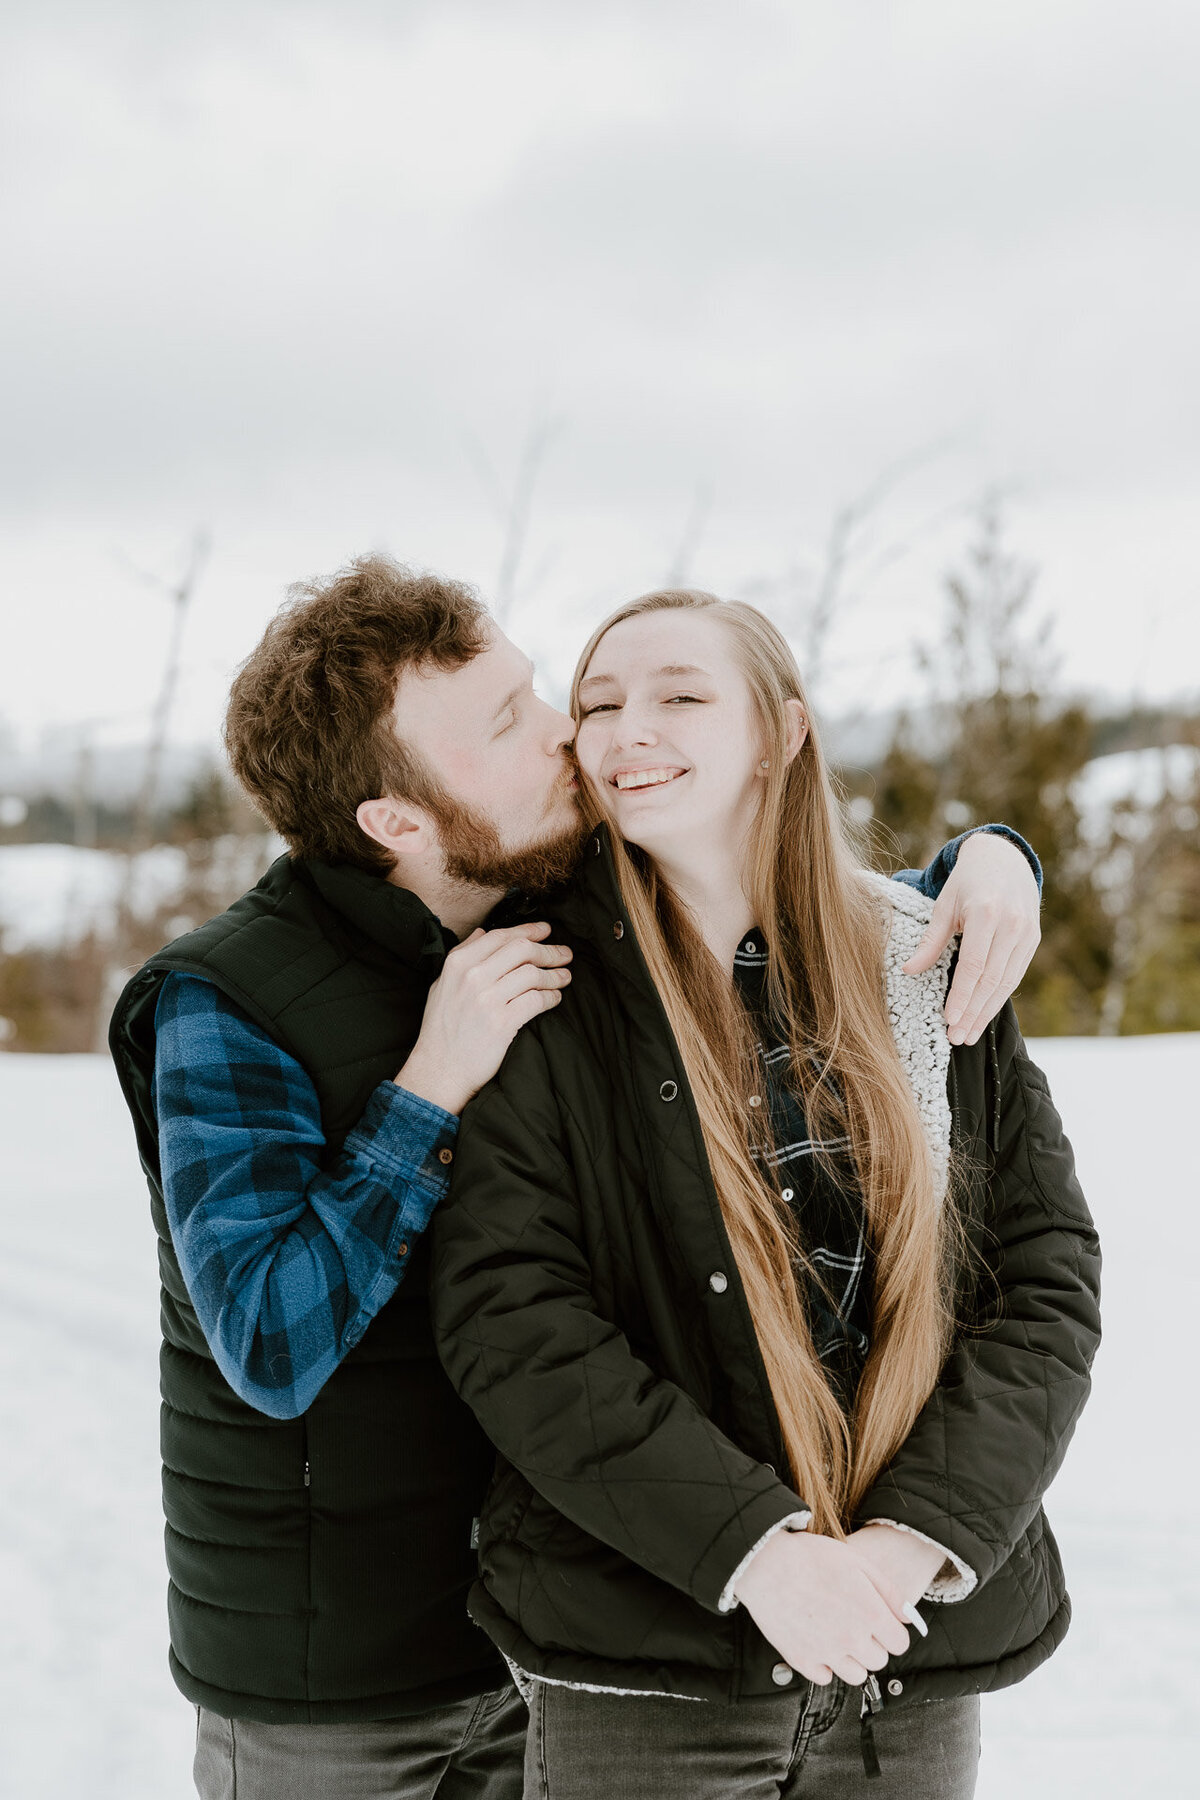 mt st helens snowy winter engagement photo at mt. st. helens washington